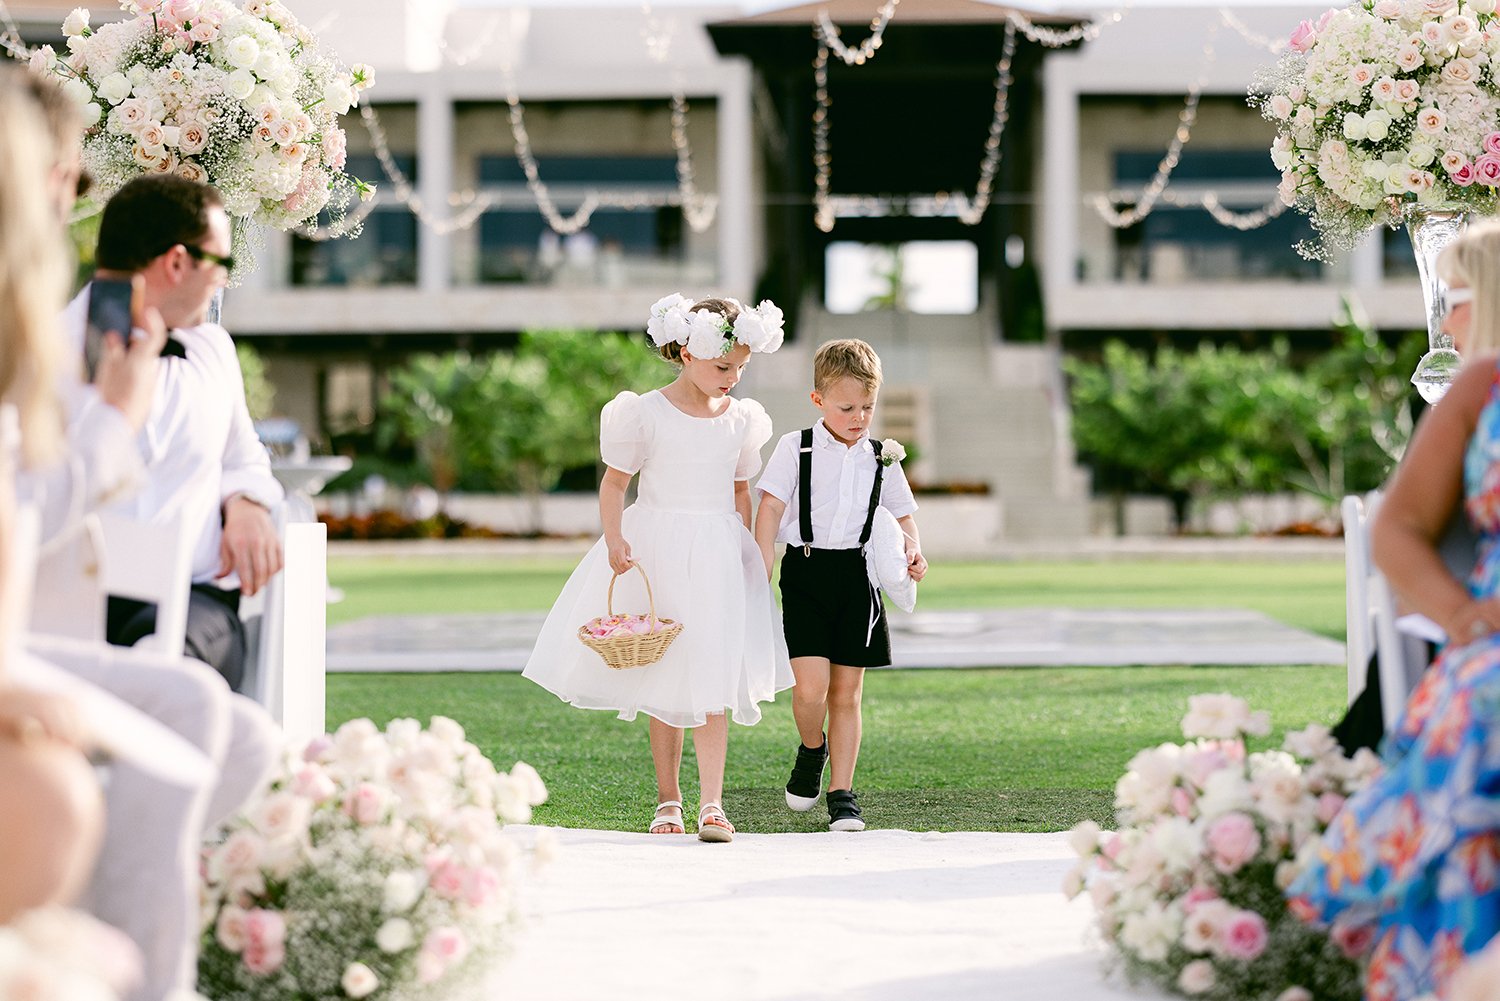 33 cute flower girl and ring bearer walking across wedding ceremony at Dreams Riviera Cancun.JPG